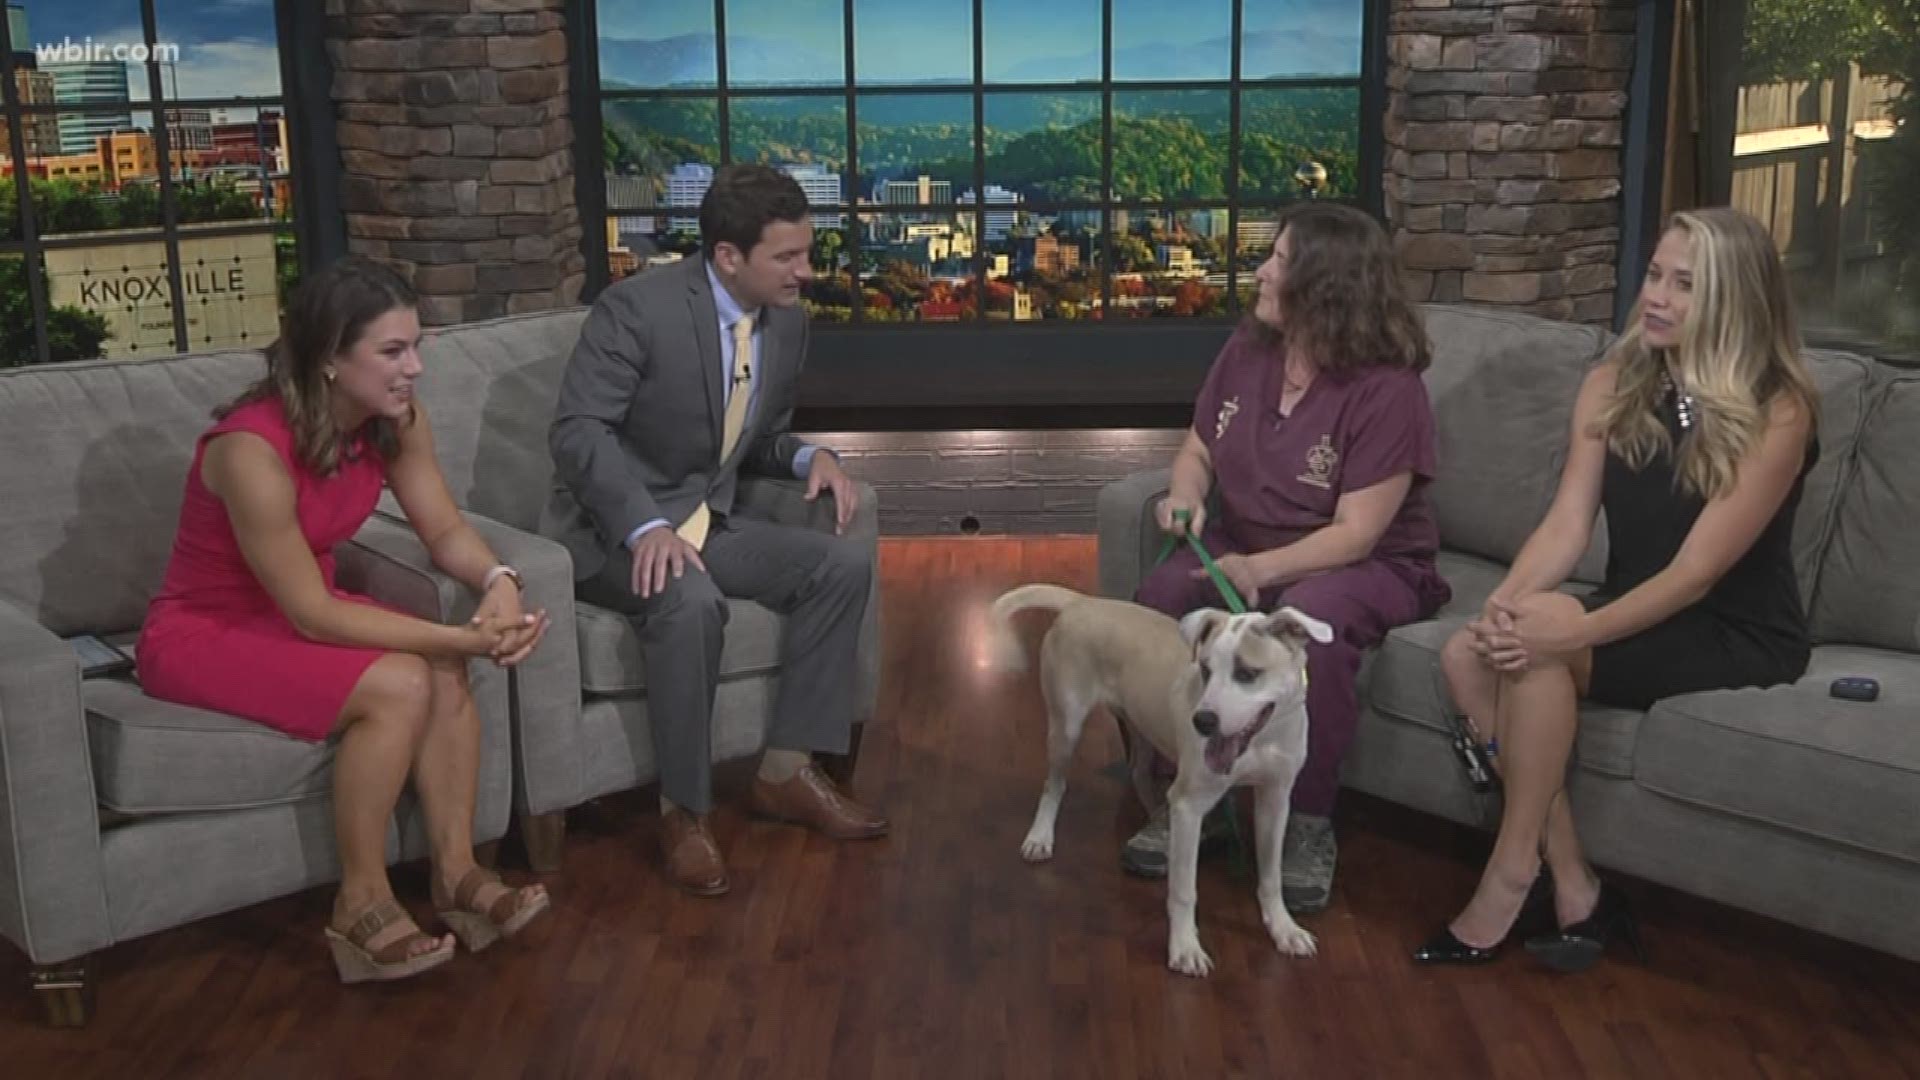 Young Williams Animal Center is here with an adorable, adoptable dog named Pistachio.